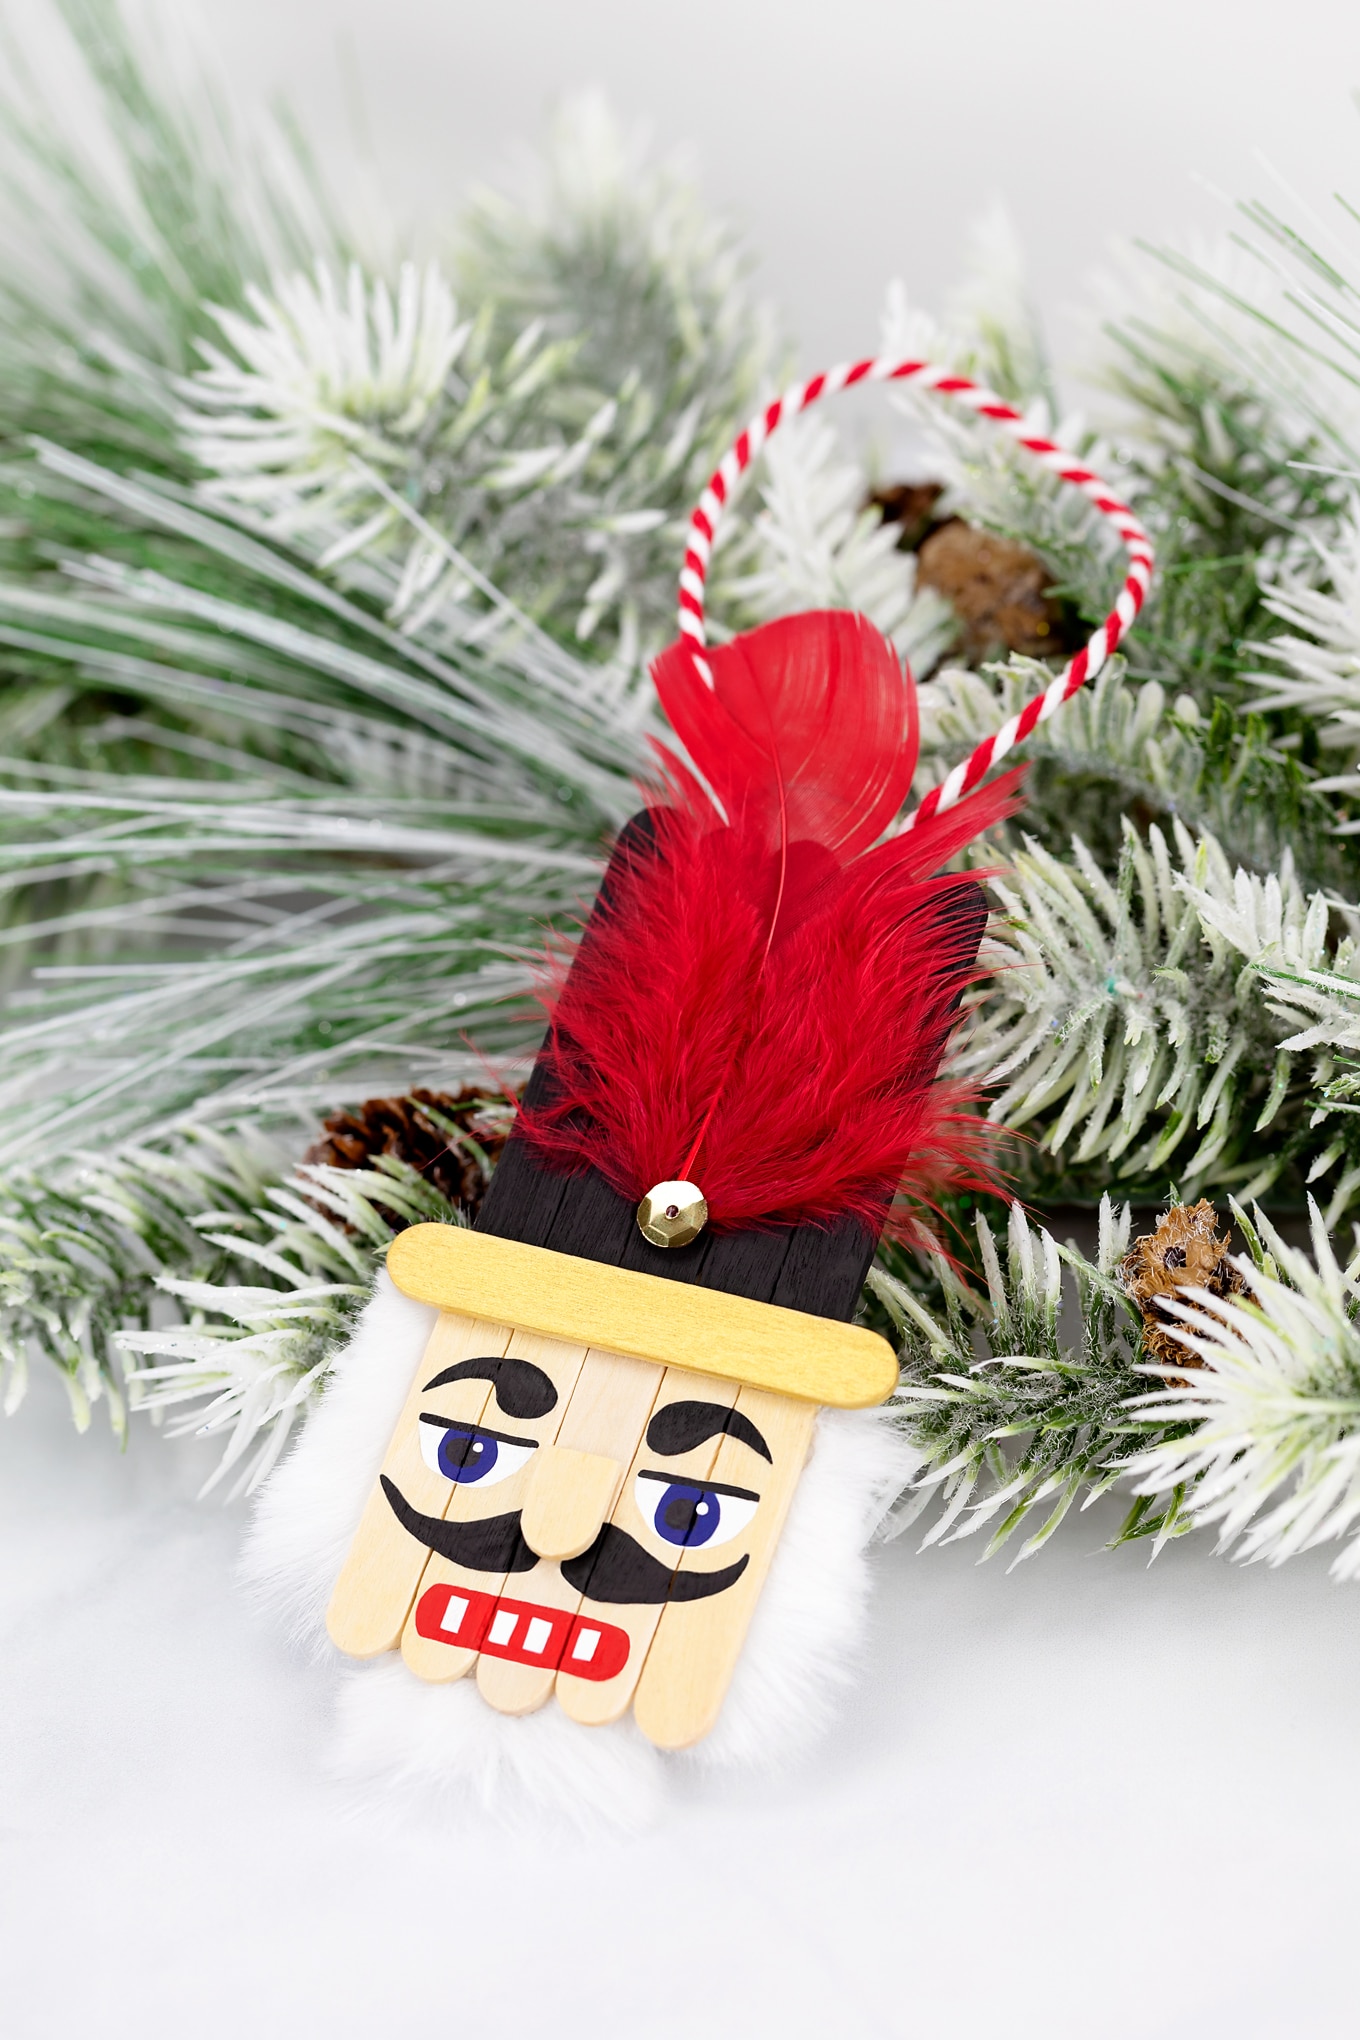 How to Make an Easy and Fun Craft Stick Nutcracker Ornament for Christmas